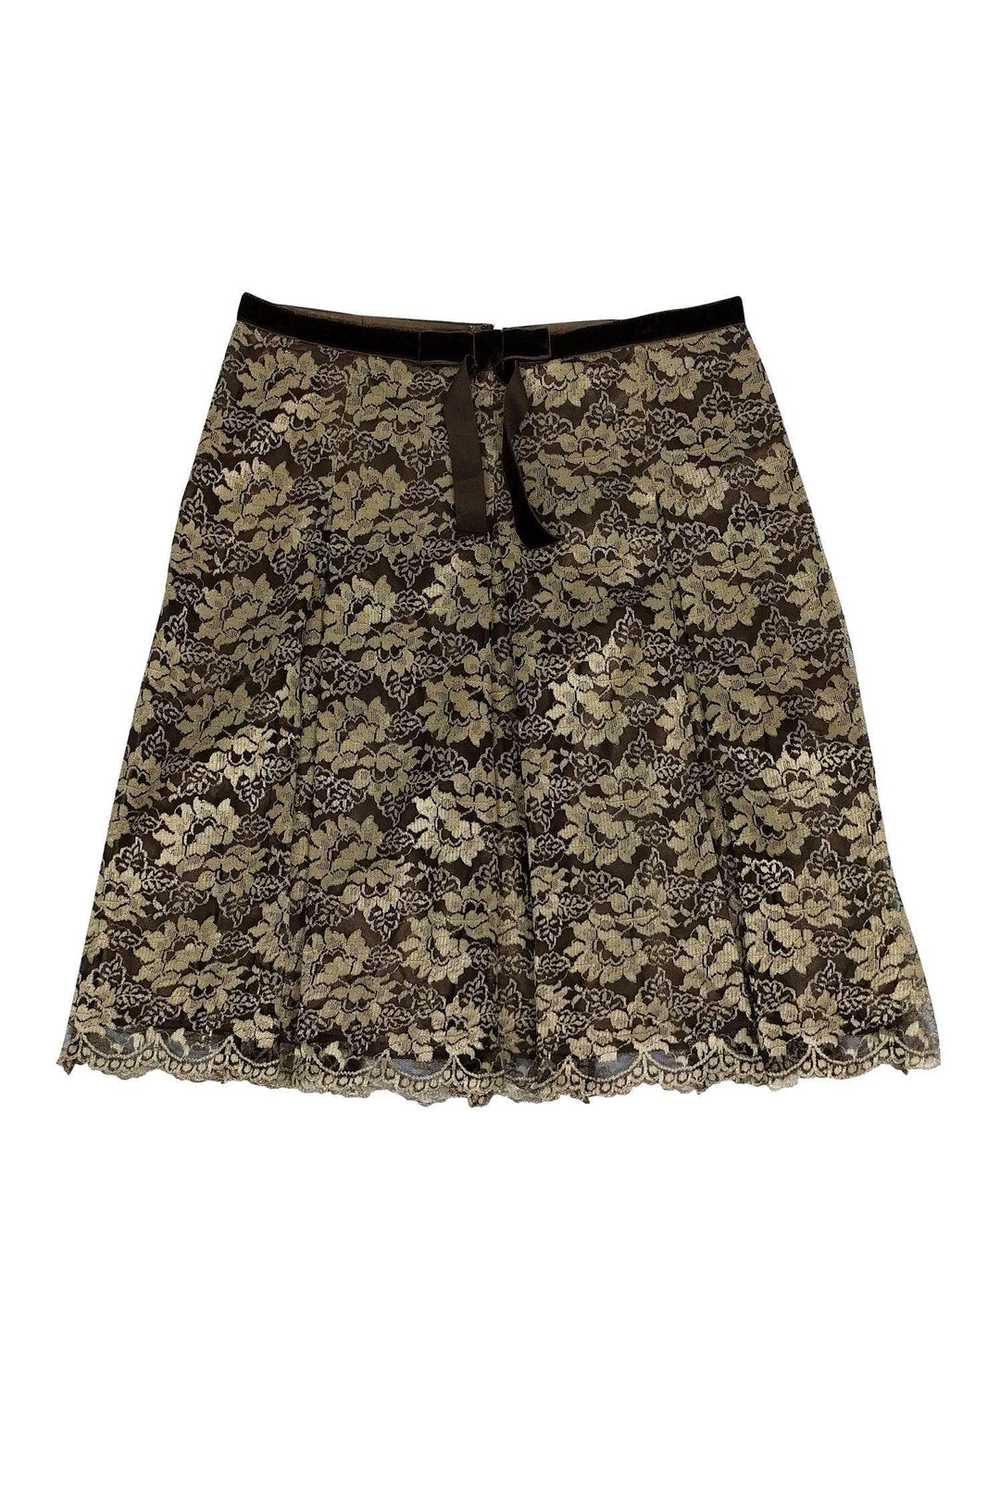 Anna Sui - Gold & Brown Lace Skirt Sz 8 - image 2